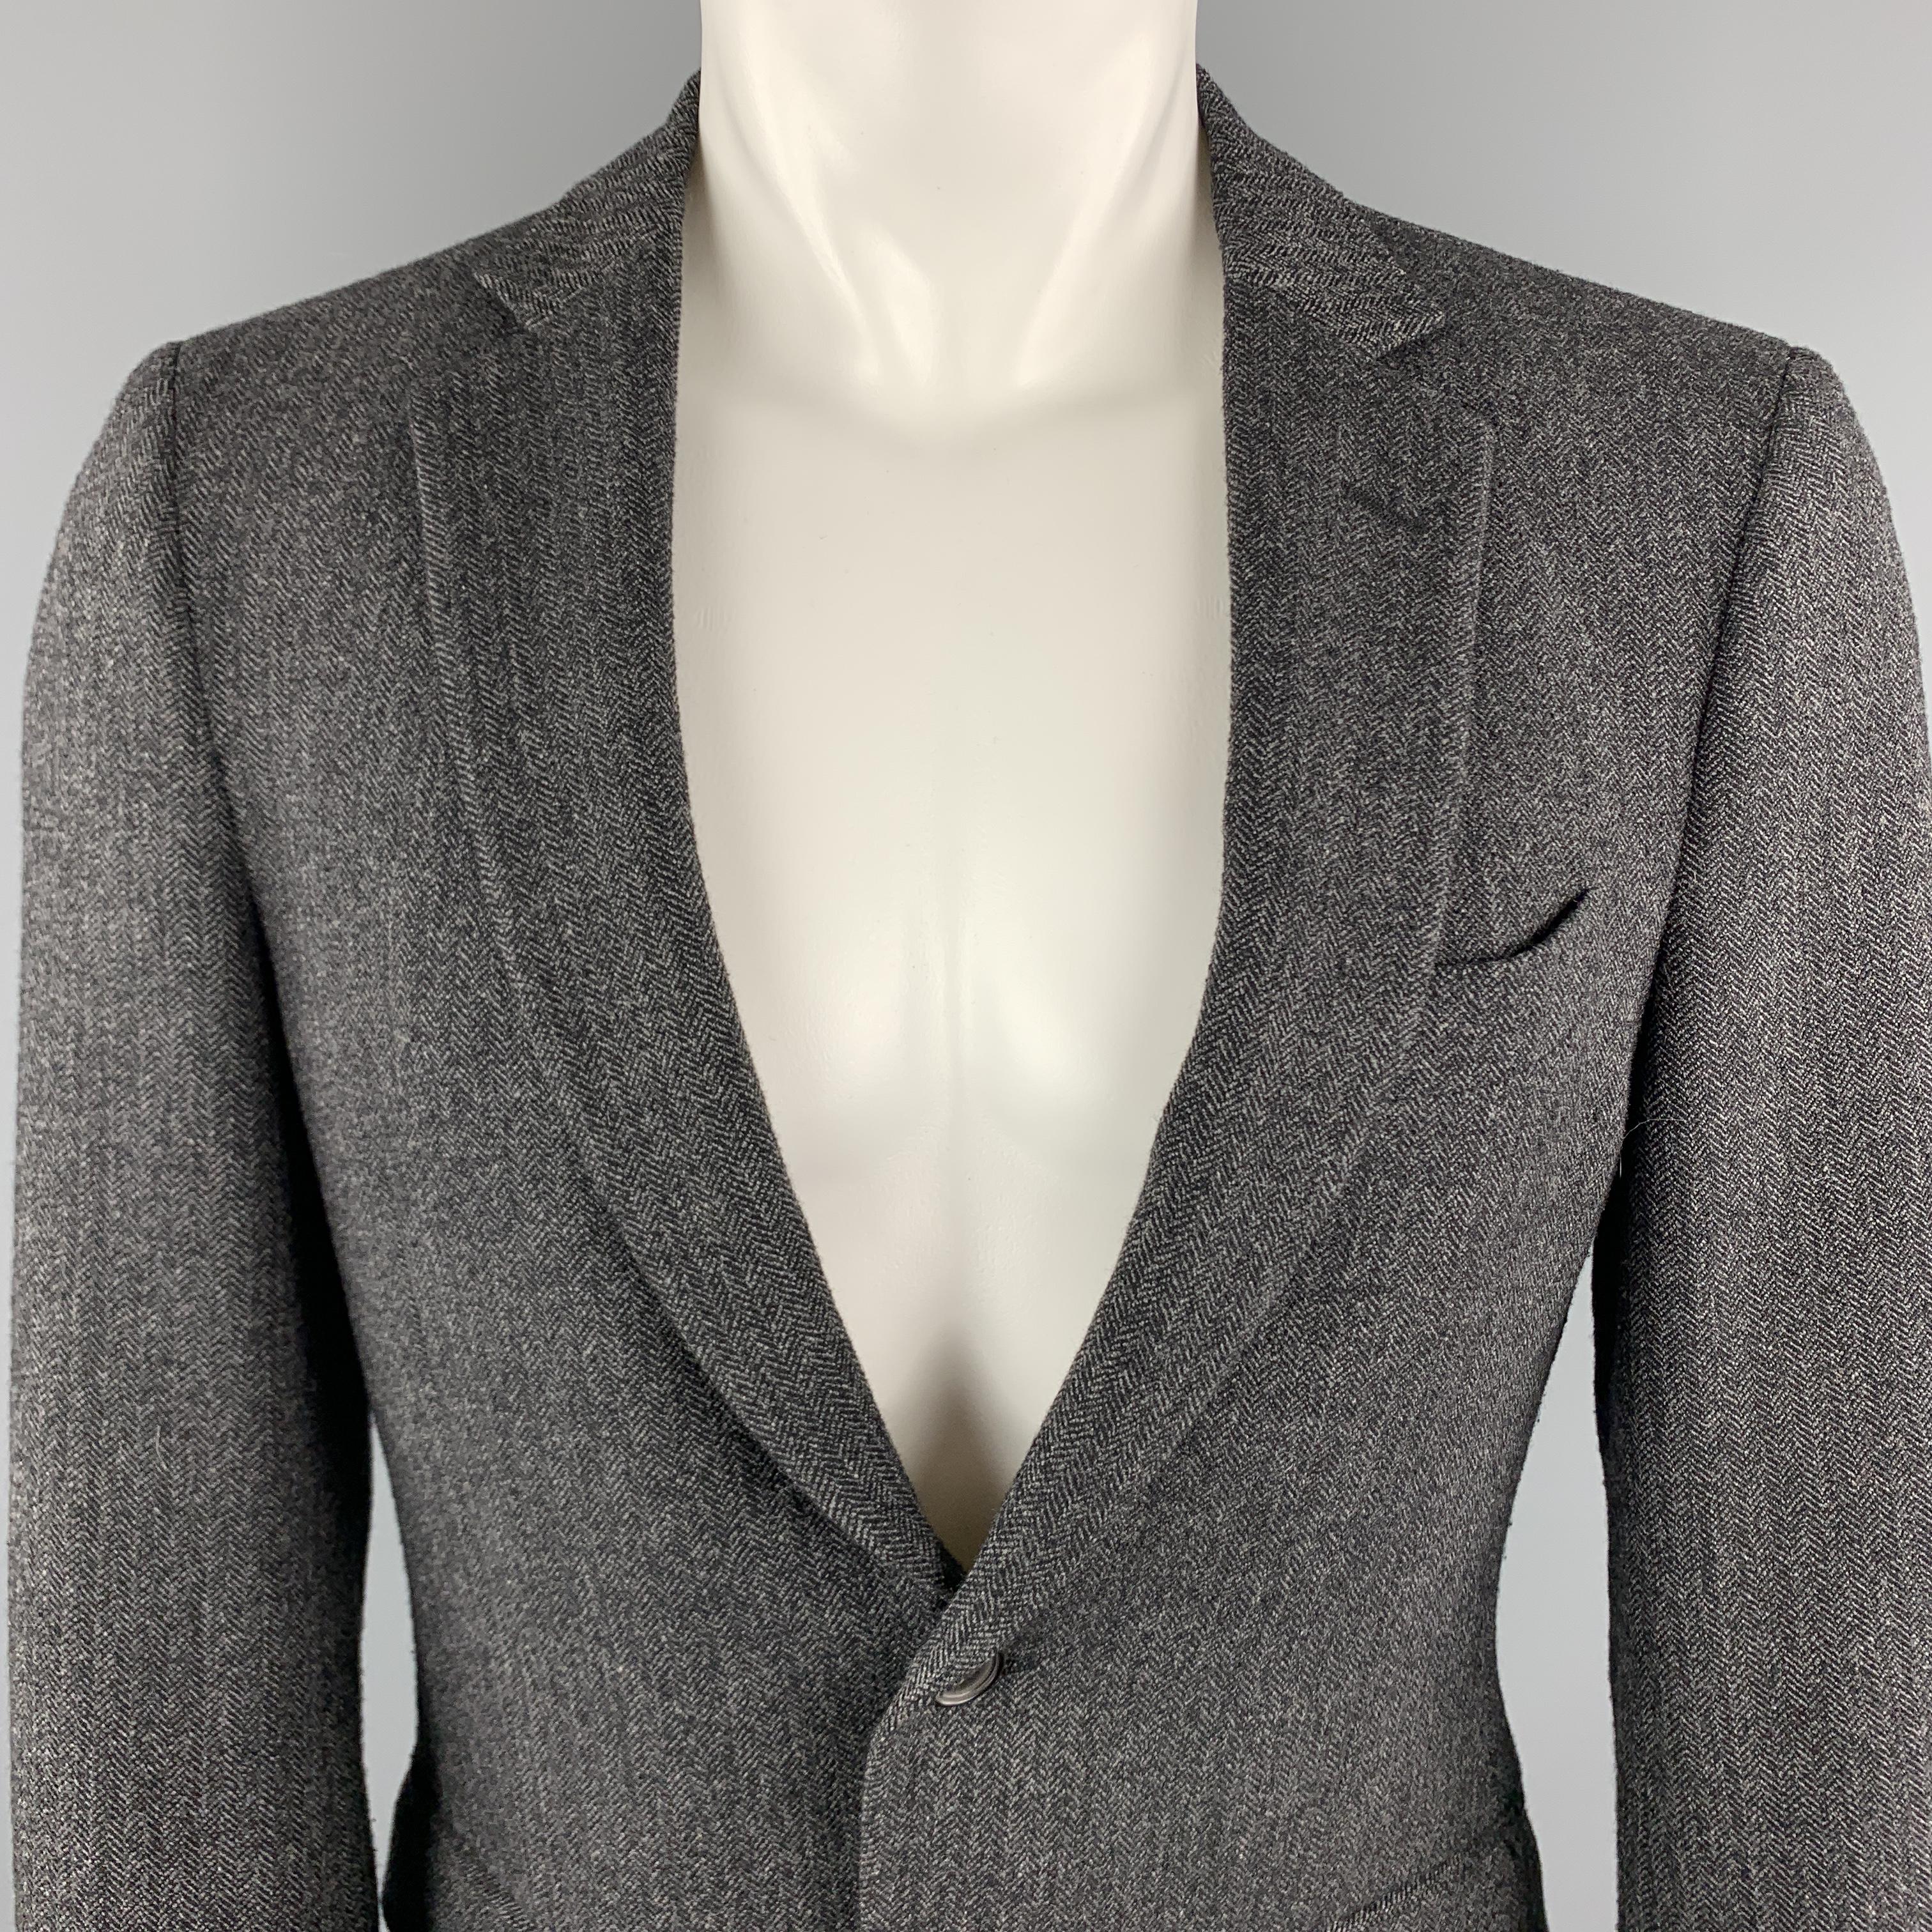 JOHN VARVATOS Sport Coat comes in a charcoal and black herringbone wool material, featuring a notch lapel, two buttons at closure, slit and flap pockets, single breasted, buttoned cuffs, and a double vent at back. Made in Italy. 

Excellent